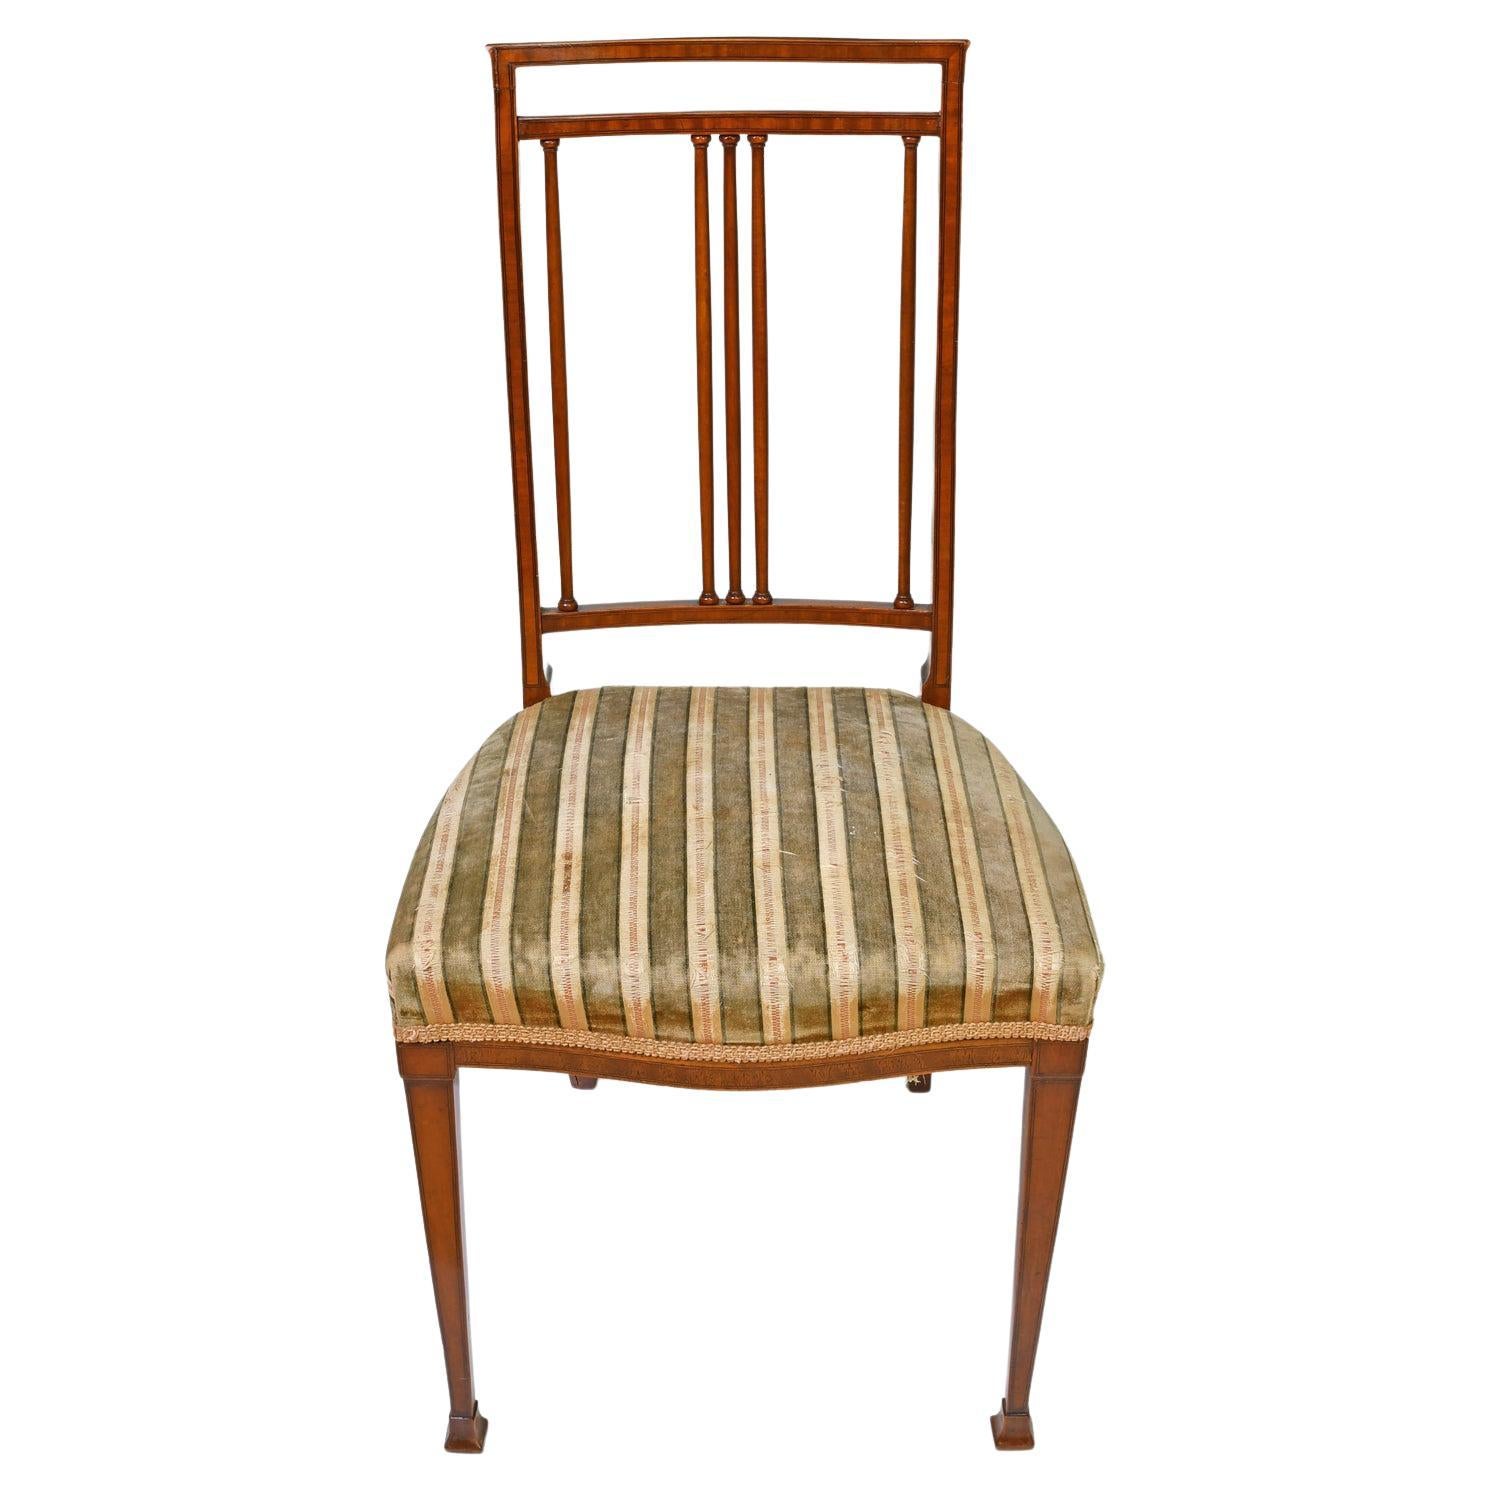 From the English Aesthetic Movement, a pair of finely-crafted side chairs in mahogany with ebonized line inlays. Featuring an exquisite choice of woods with concave high back with three finely-turned vertical columns along the center between